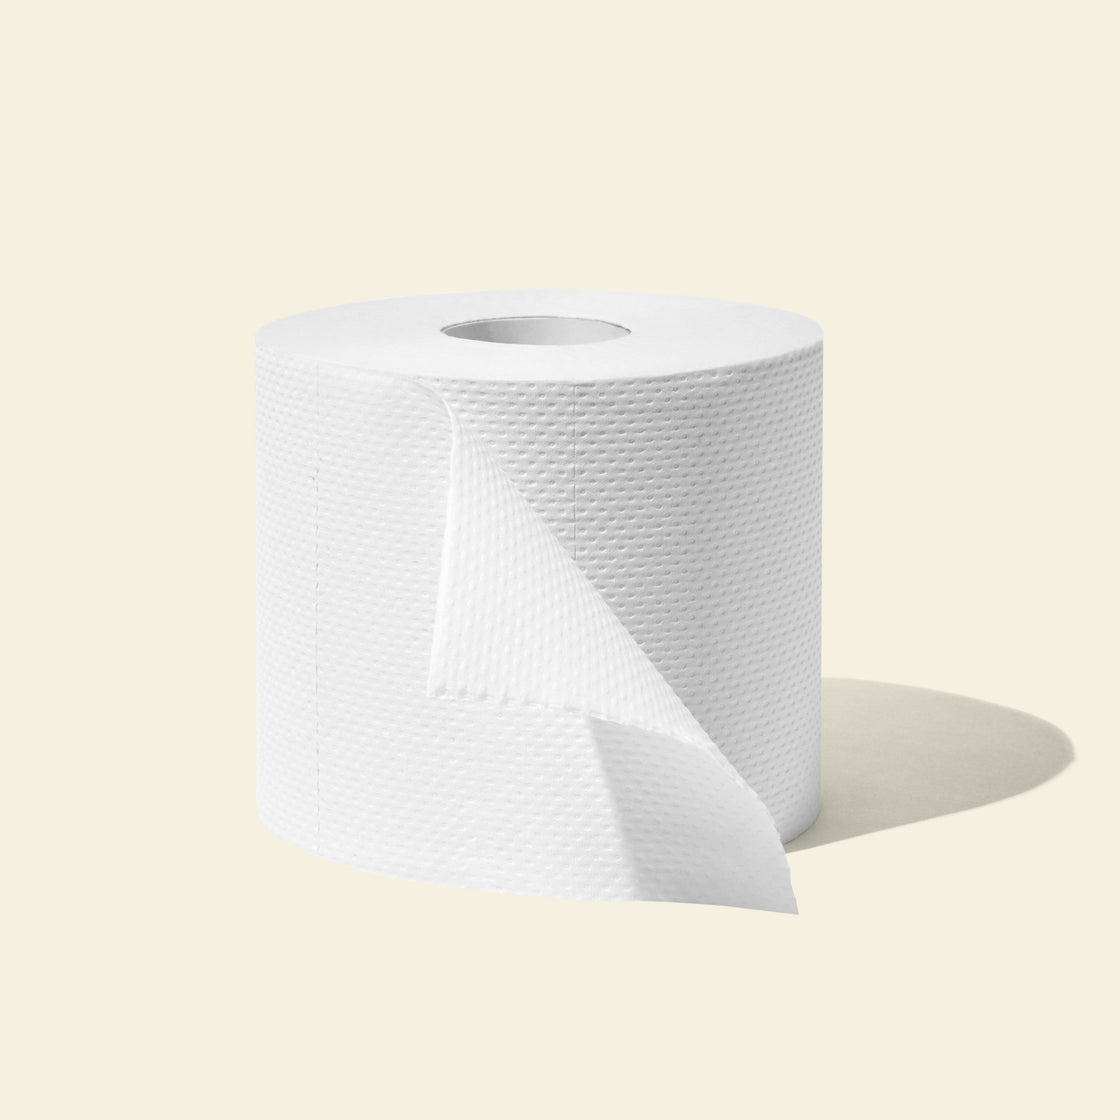 How to Make Recycled Toilet Paper